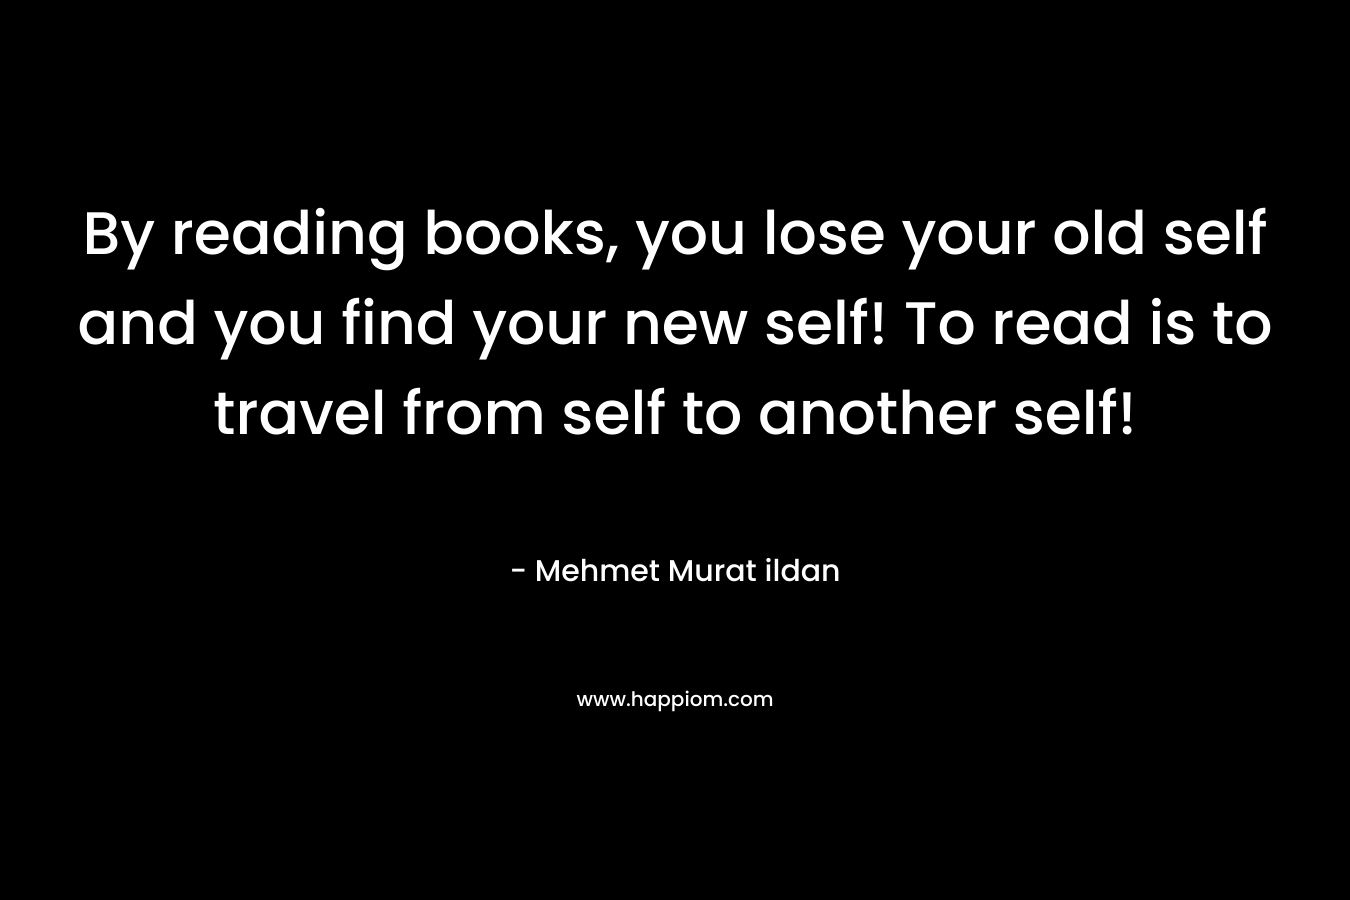 By reading books, you lose your old self and you find your new self! To read is to travel from self to another self!